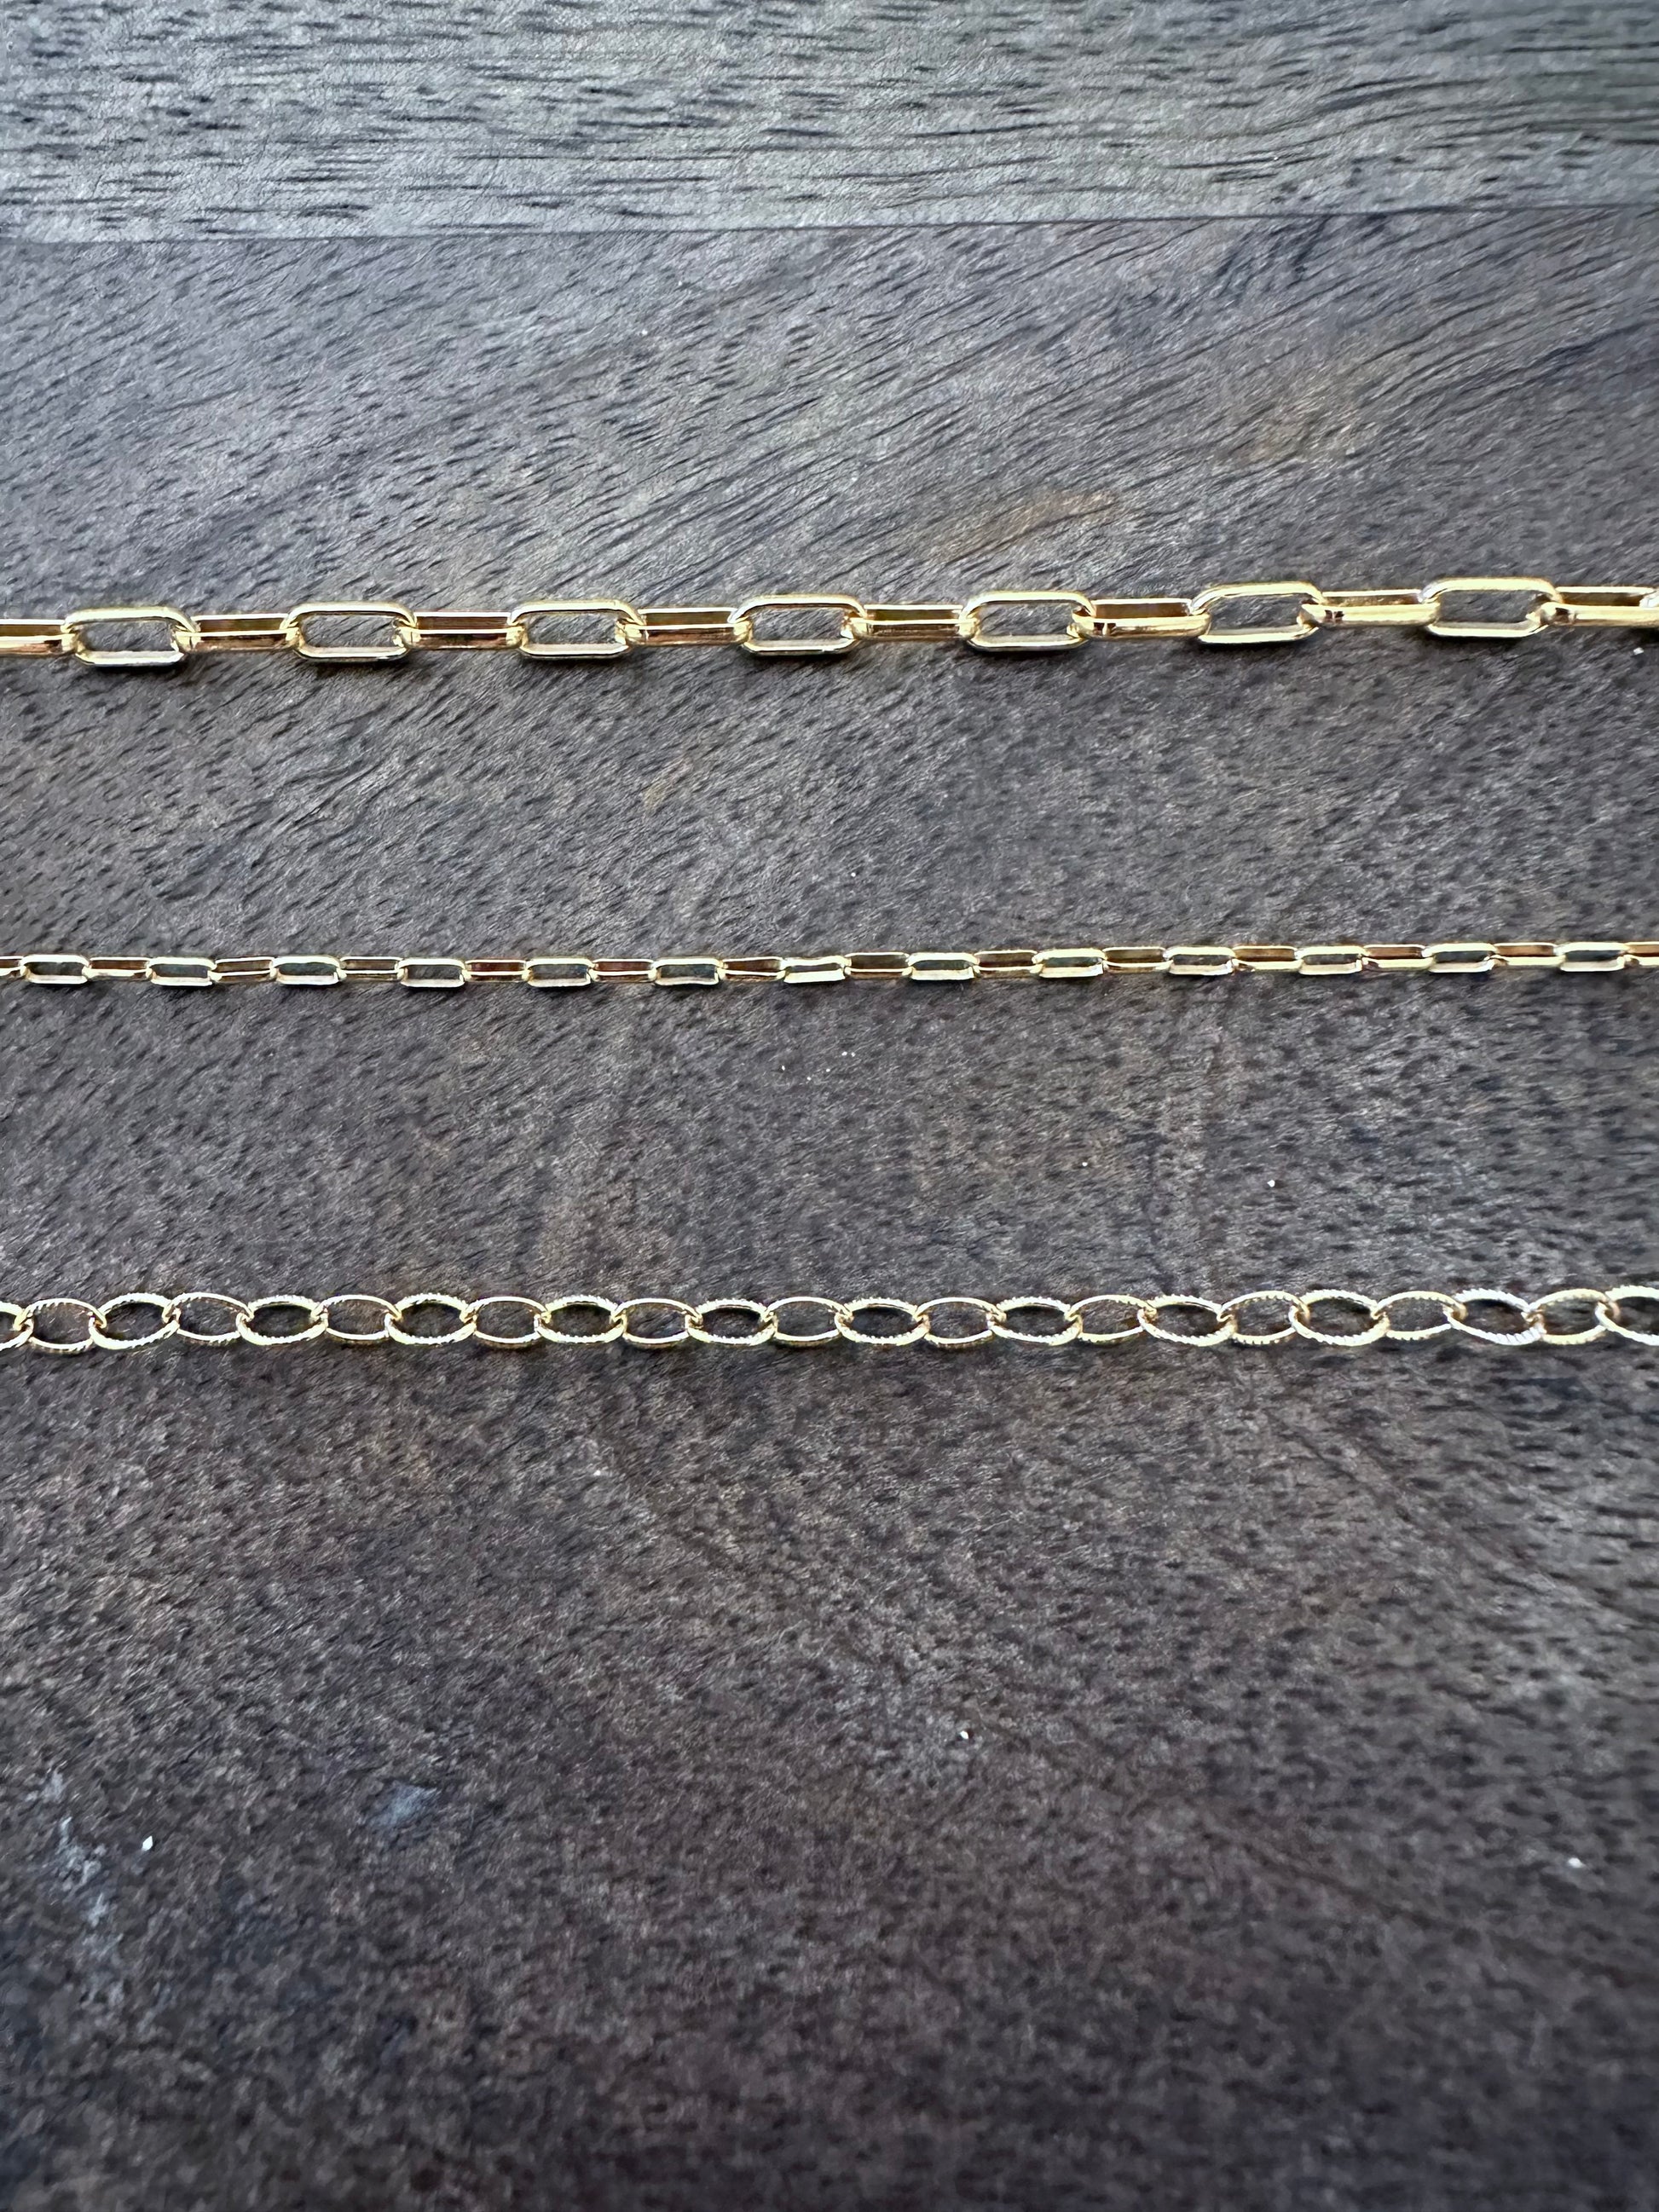 three chains on a grey wooden background. the first chain is large rectangular links, the second is smaller rectangular links, the third is alternating textured and polished oval links